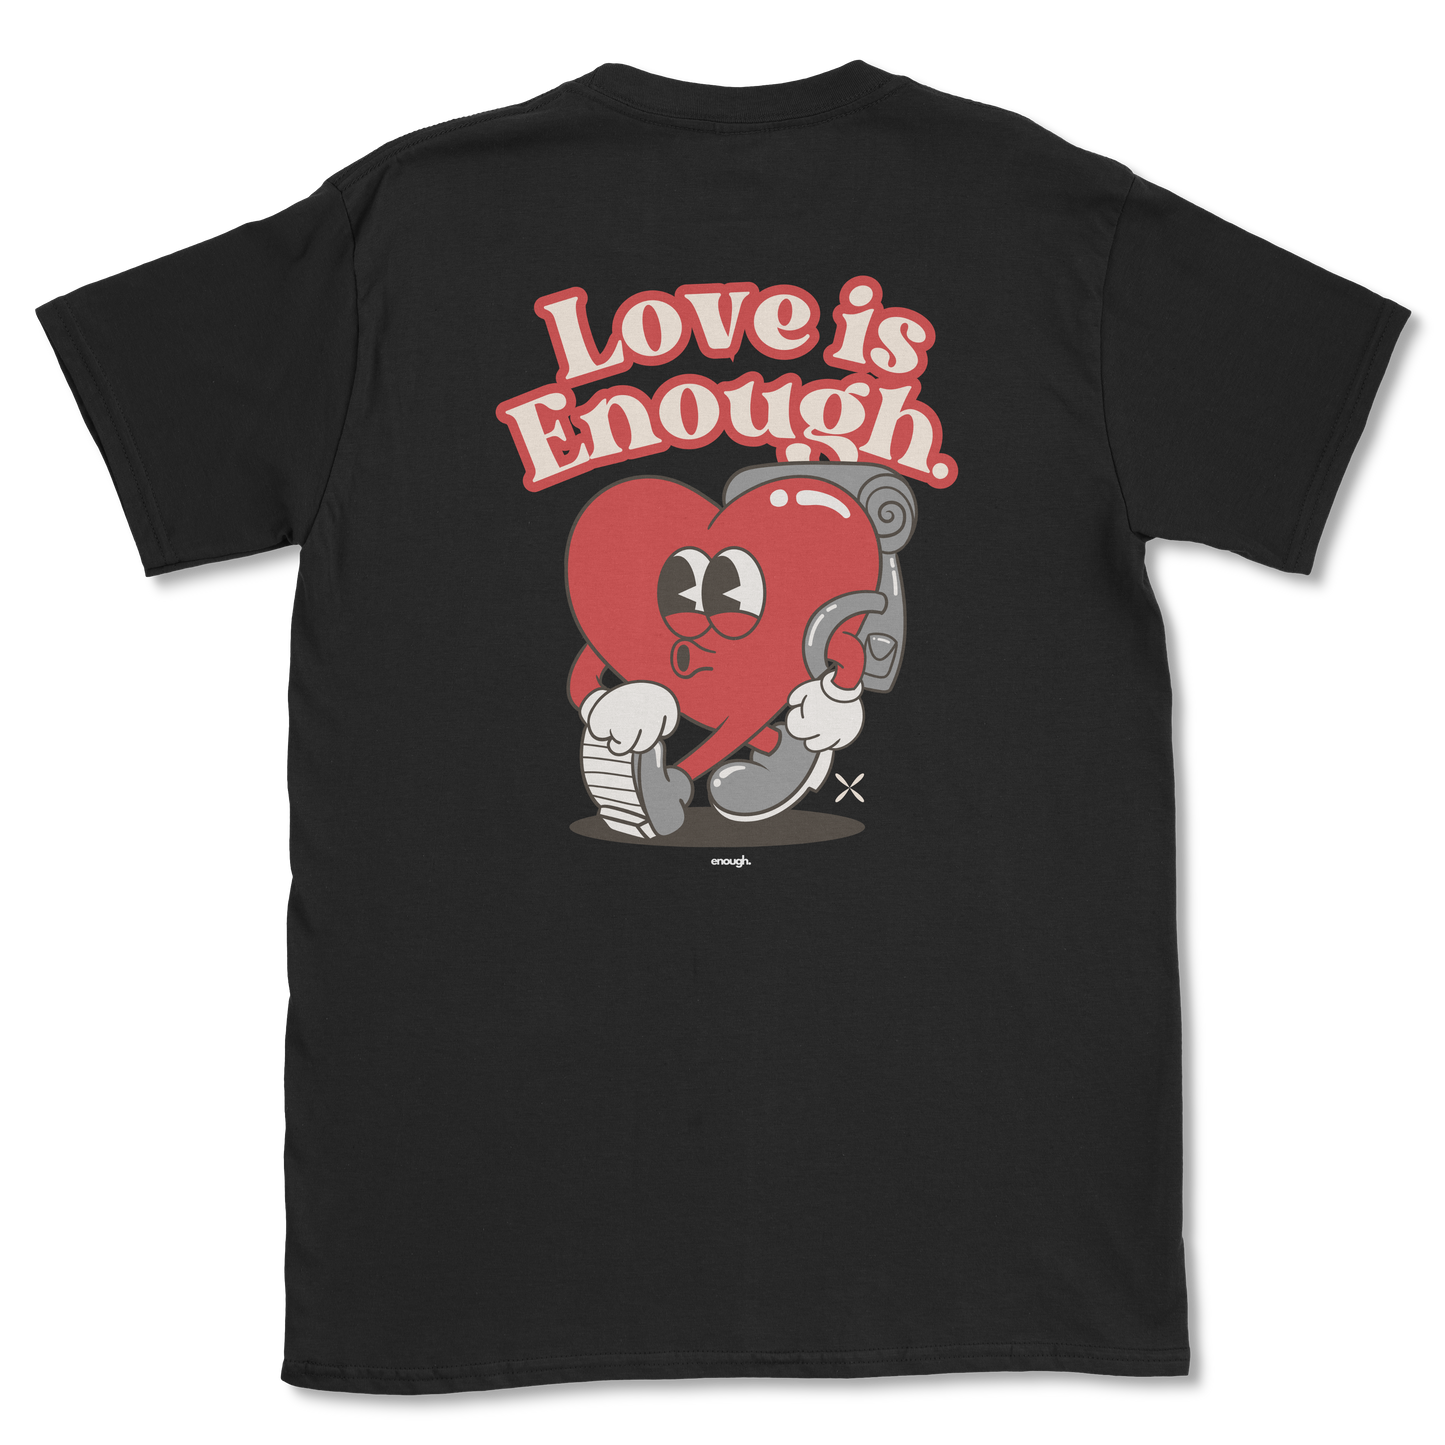 Love is Enough